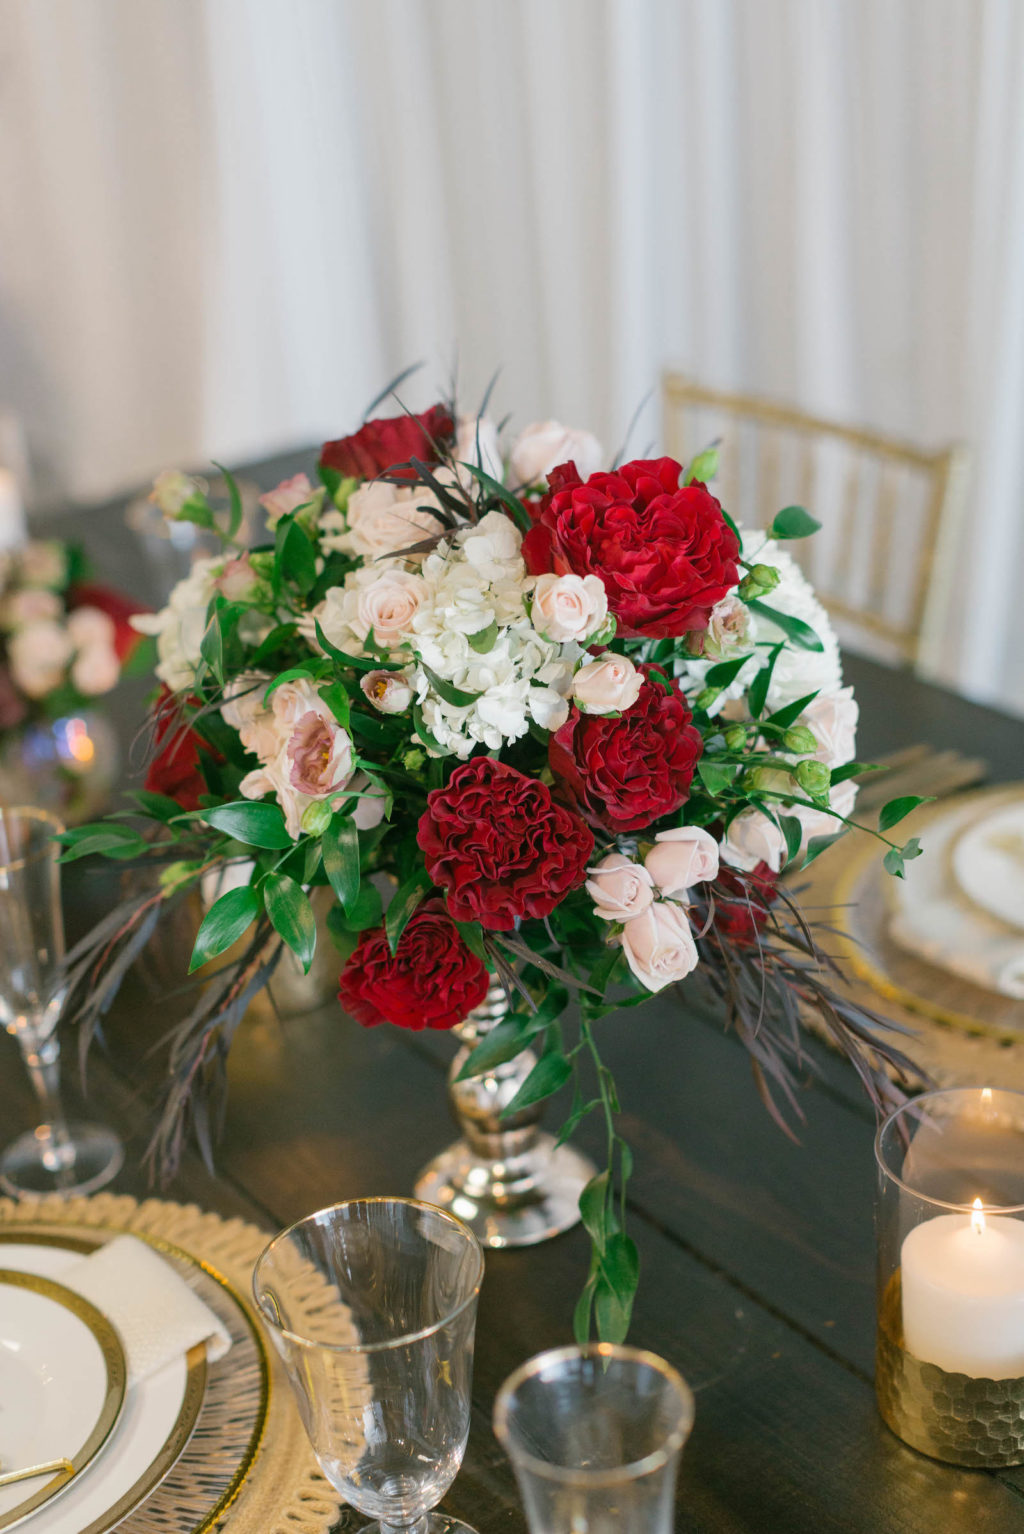 Romantic Red Low Centerpieces with Gold Chargers and Personalized Name Cards Styled with Love Influencer Wedding | St. Pete Beach Wedding Venue Bellwether Beach Resort